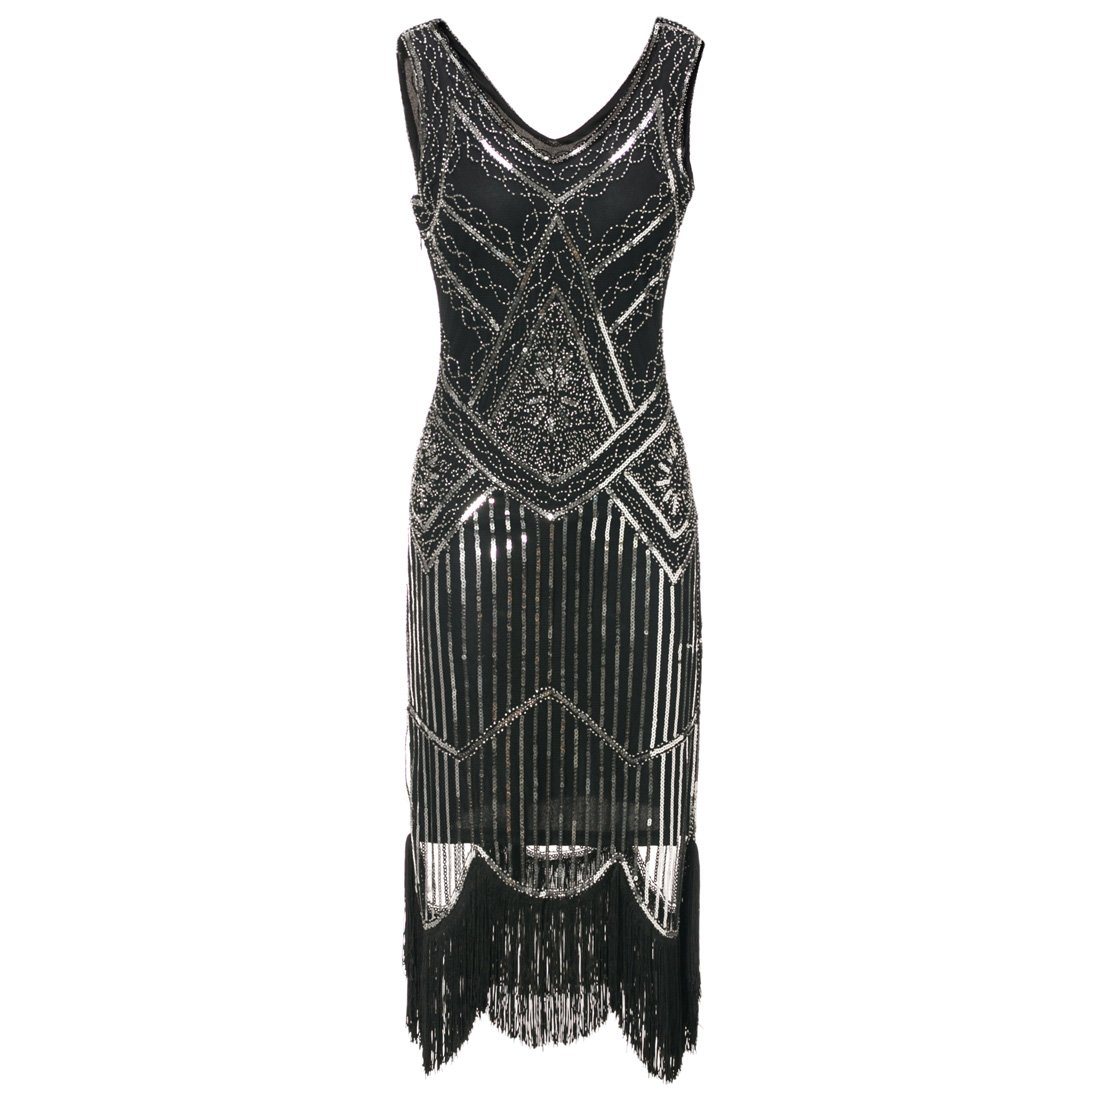 Silver Sequined 1920 Dresses Vintage 20s Inspired Great Gatsby Party 